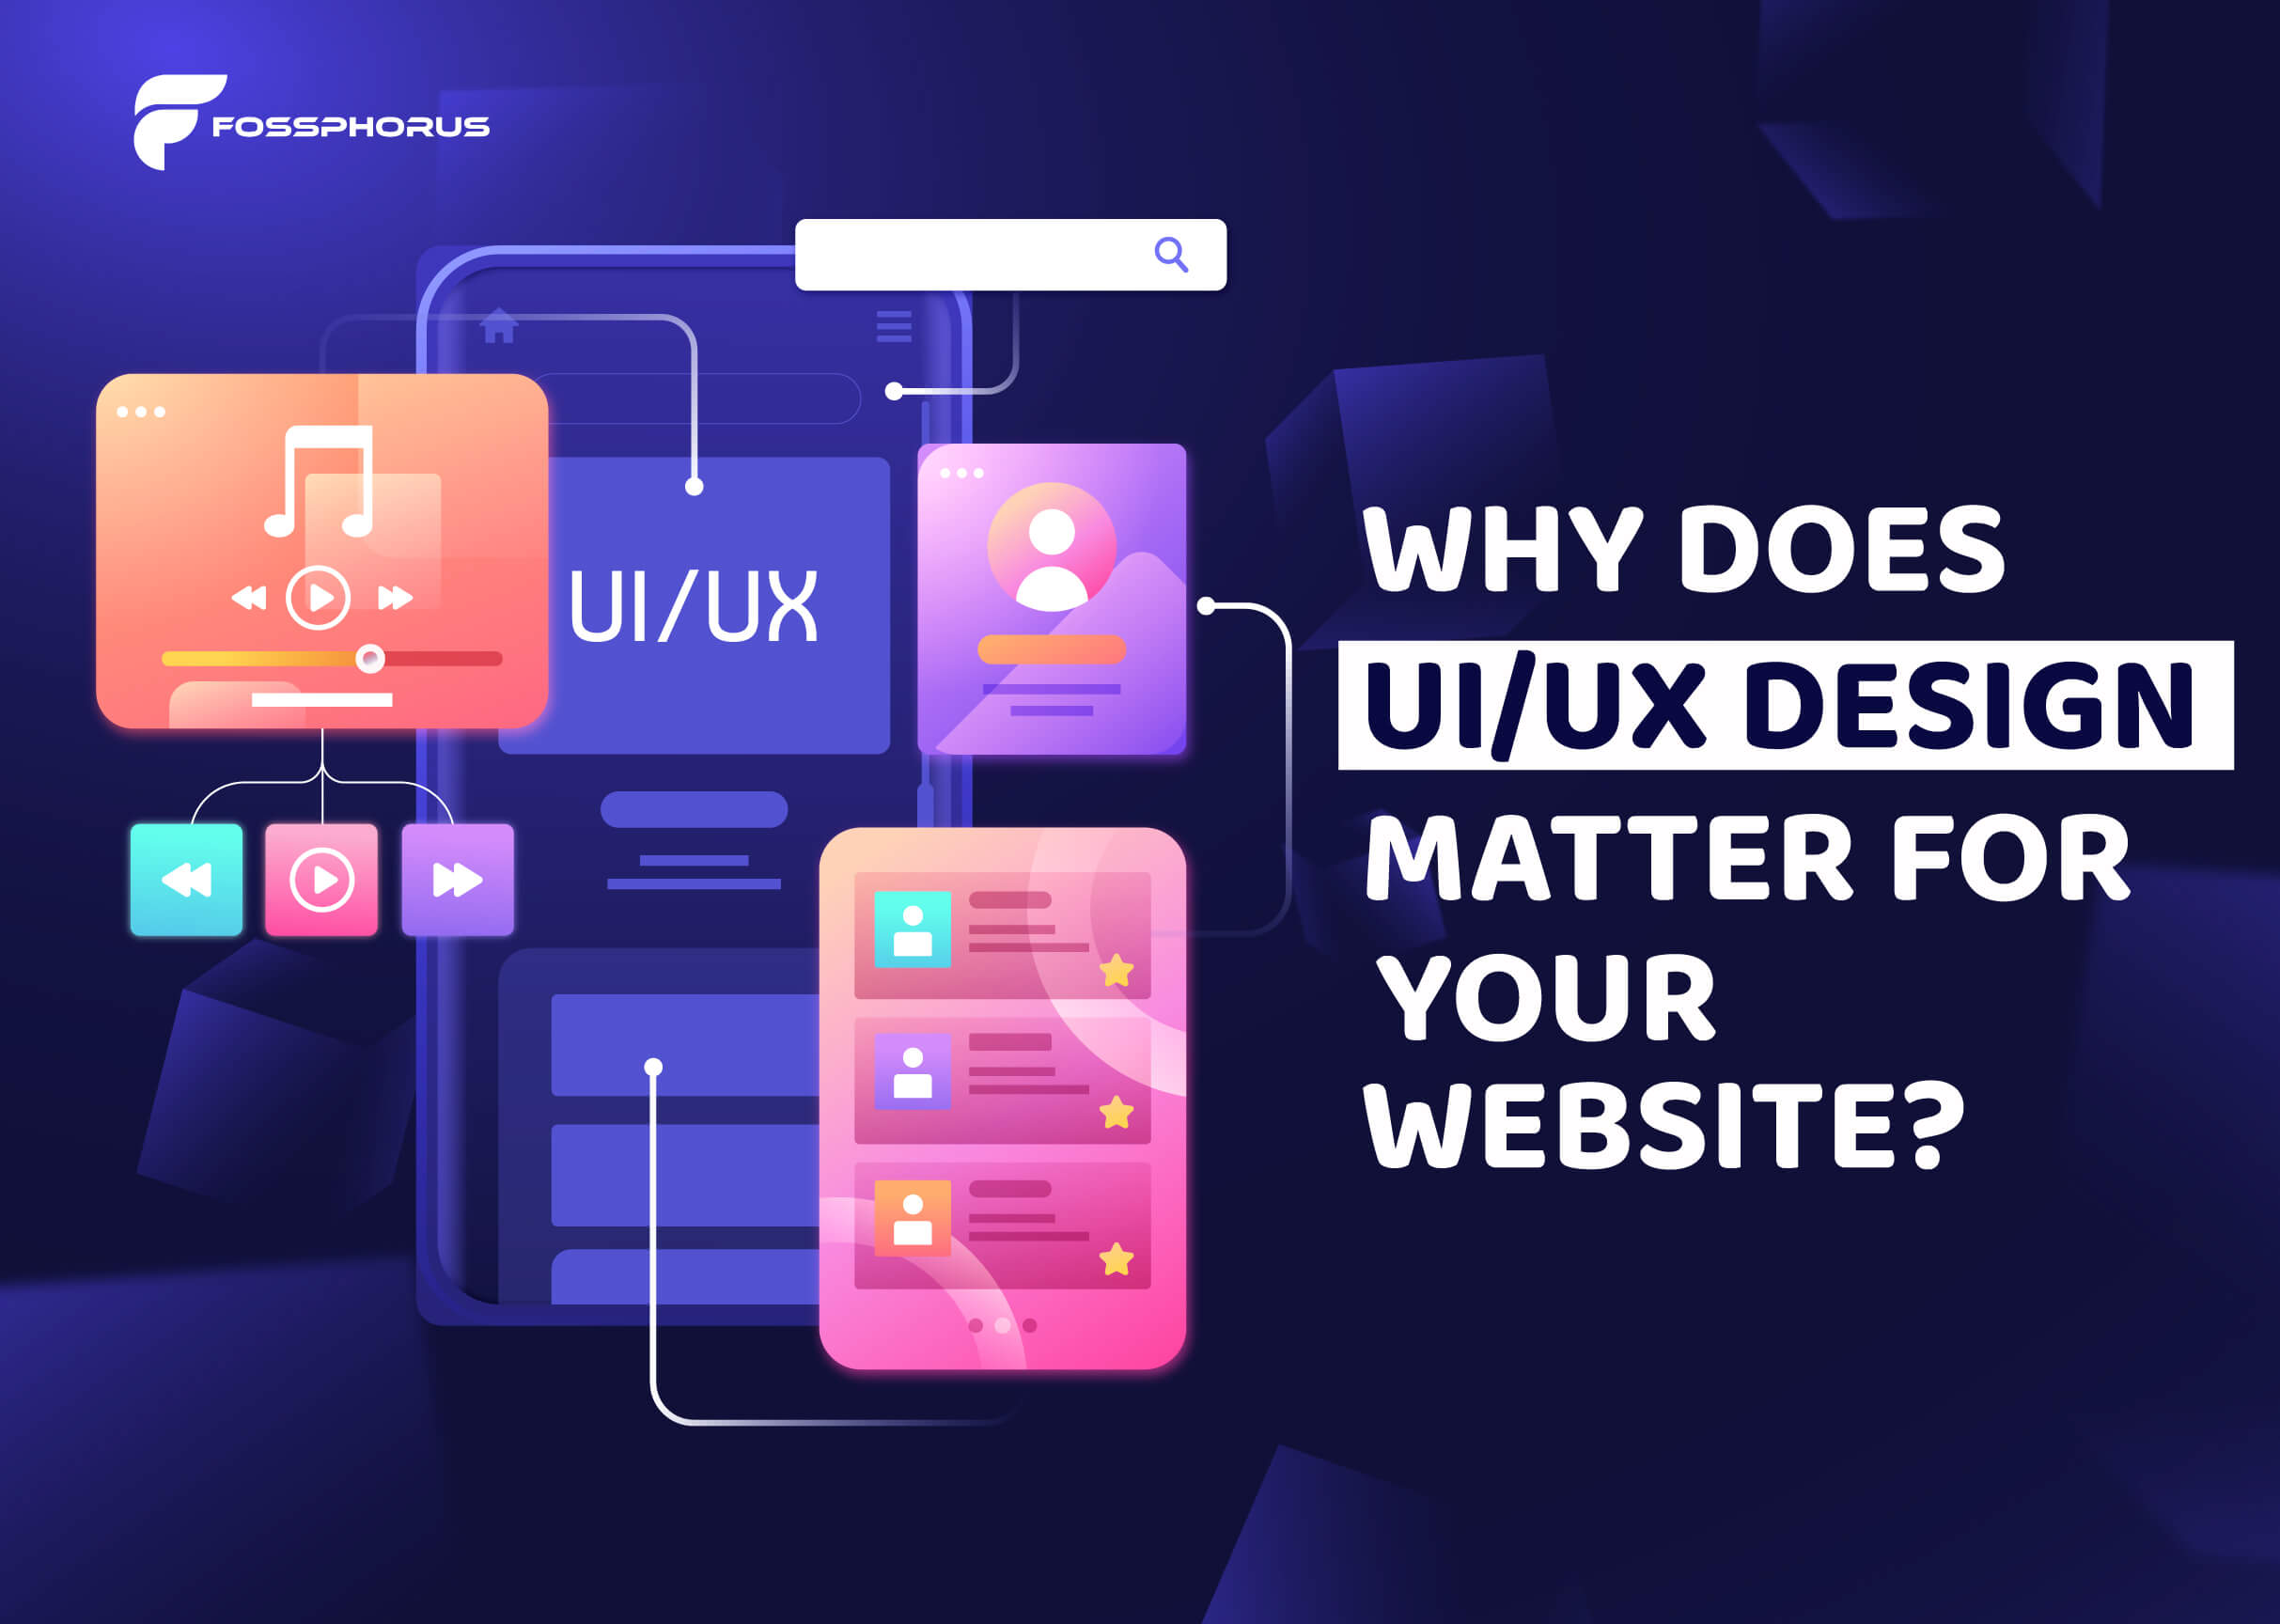 Why Does UI/UX Design Matter for Your Website?